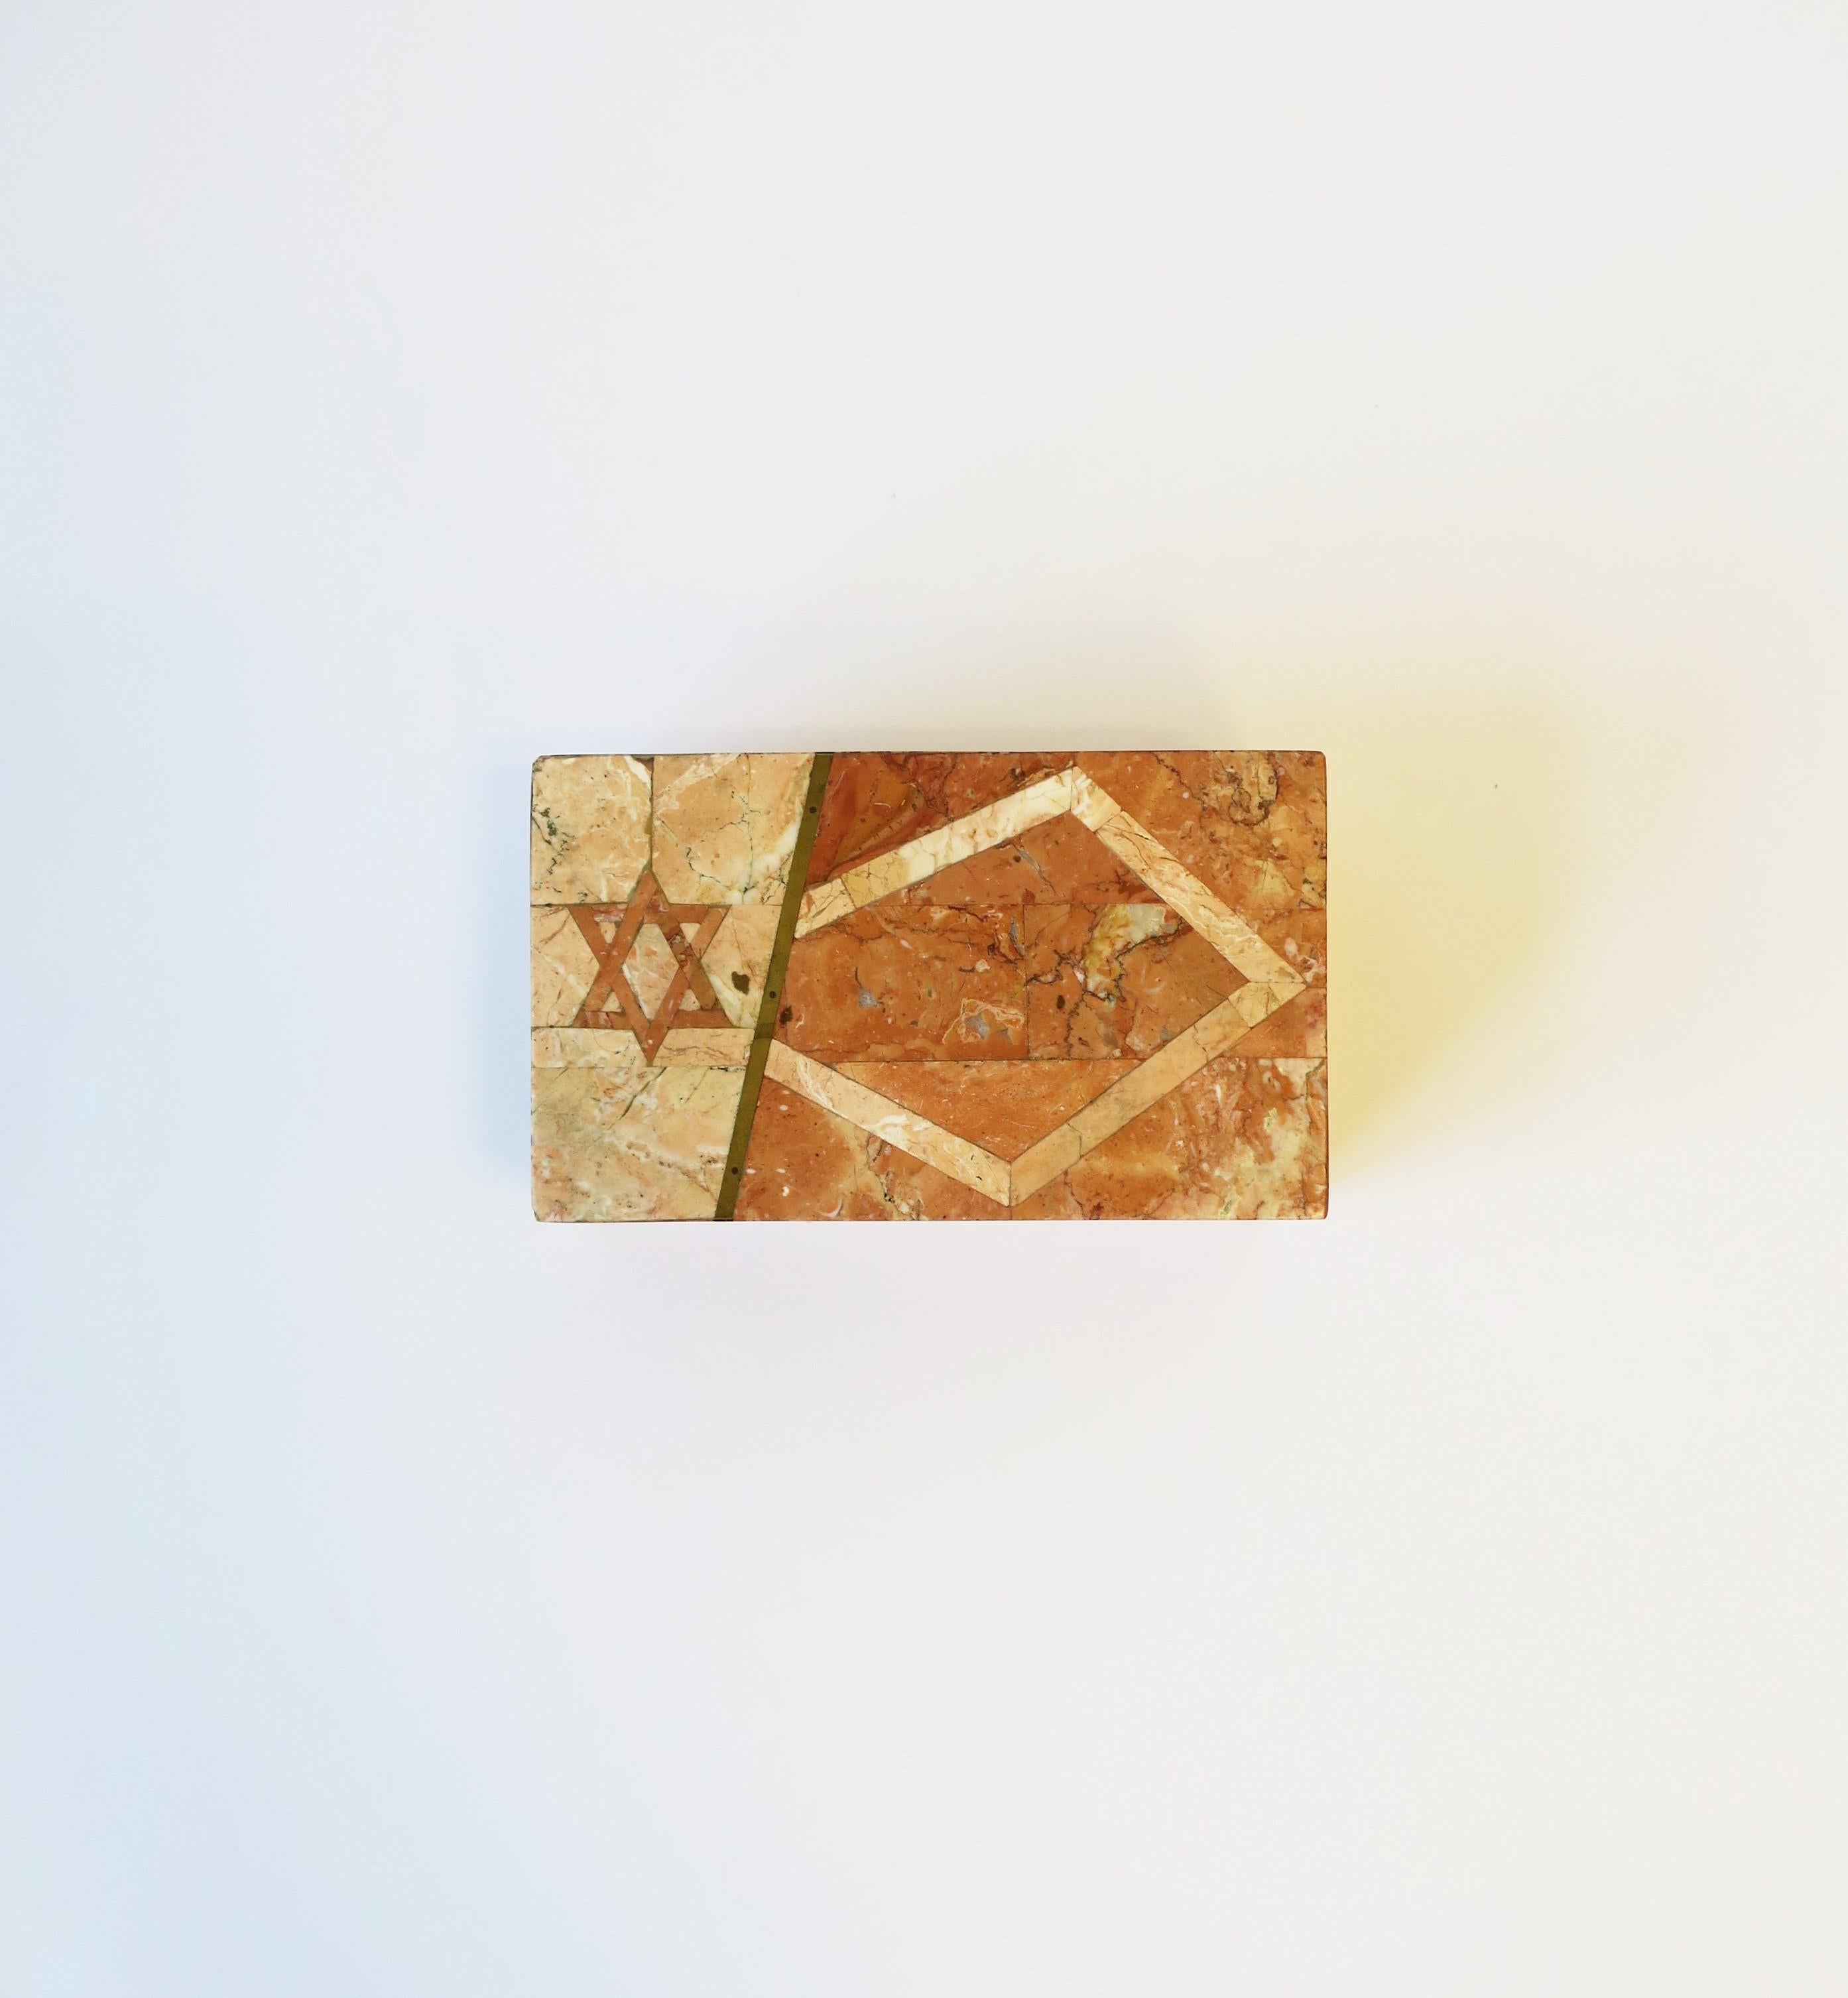 A beautiful modern style or Postmodern period marble and brass box with Jewish Star of David design, circa late-20th century, 1980s, 90s. Box, attributed to designer Maitland Smith, is rectangular with a wood interior. Marble veneer is various